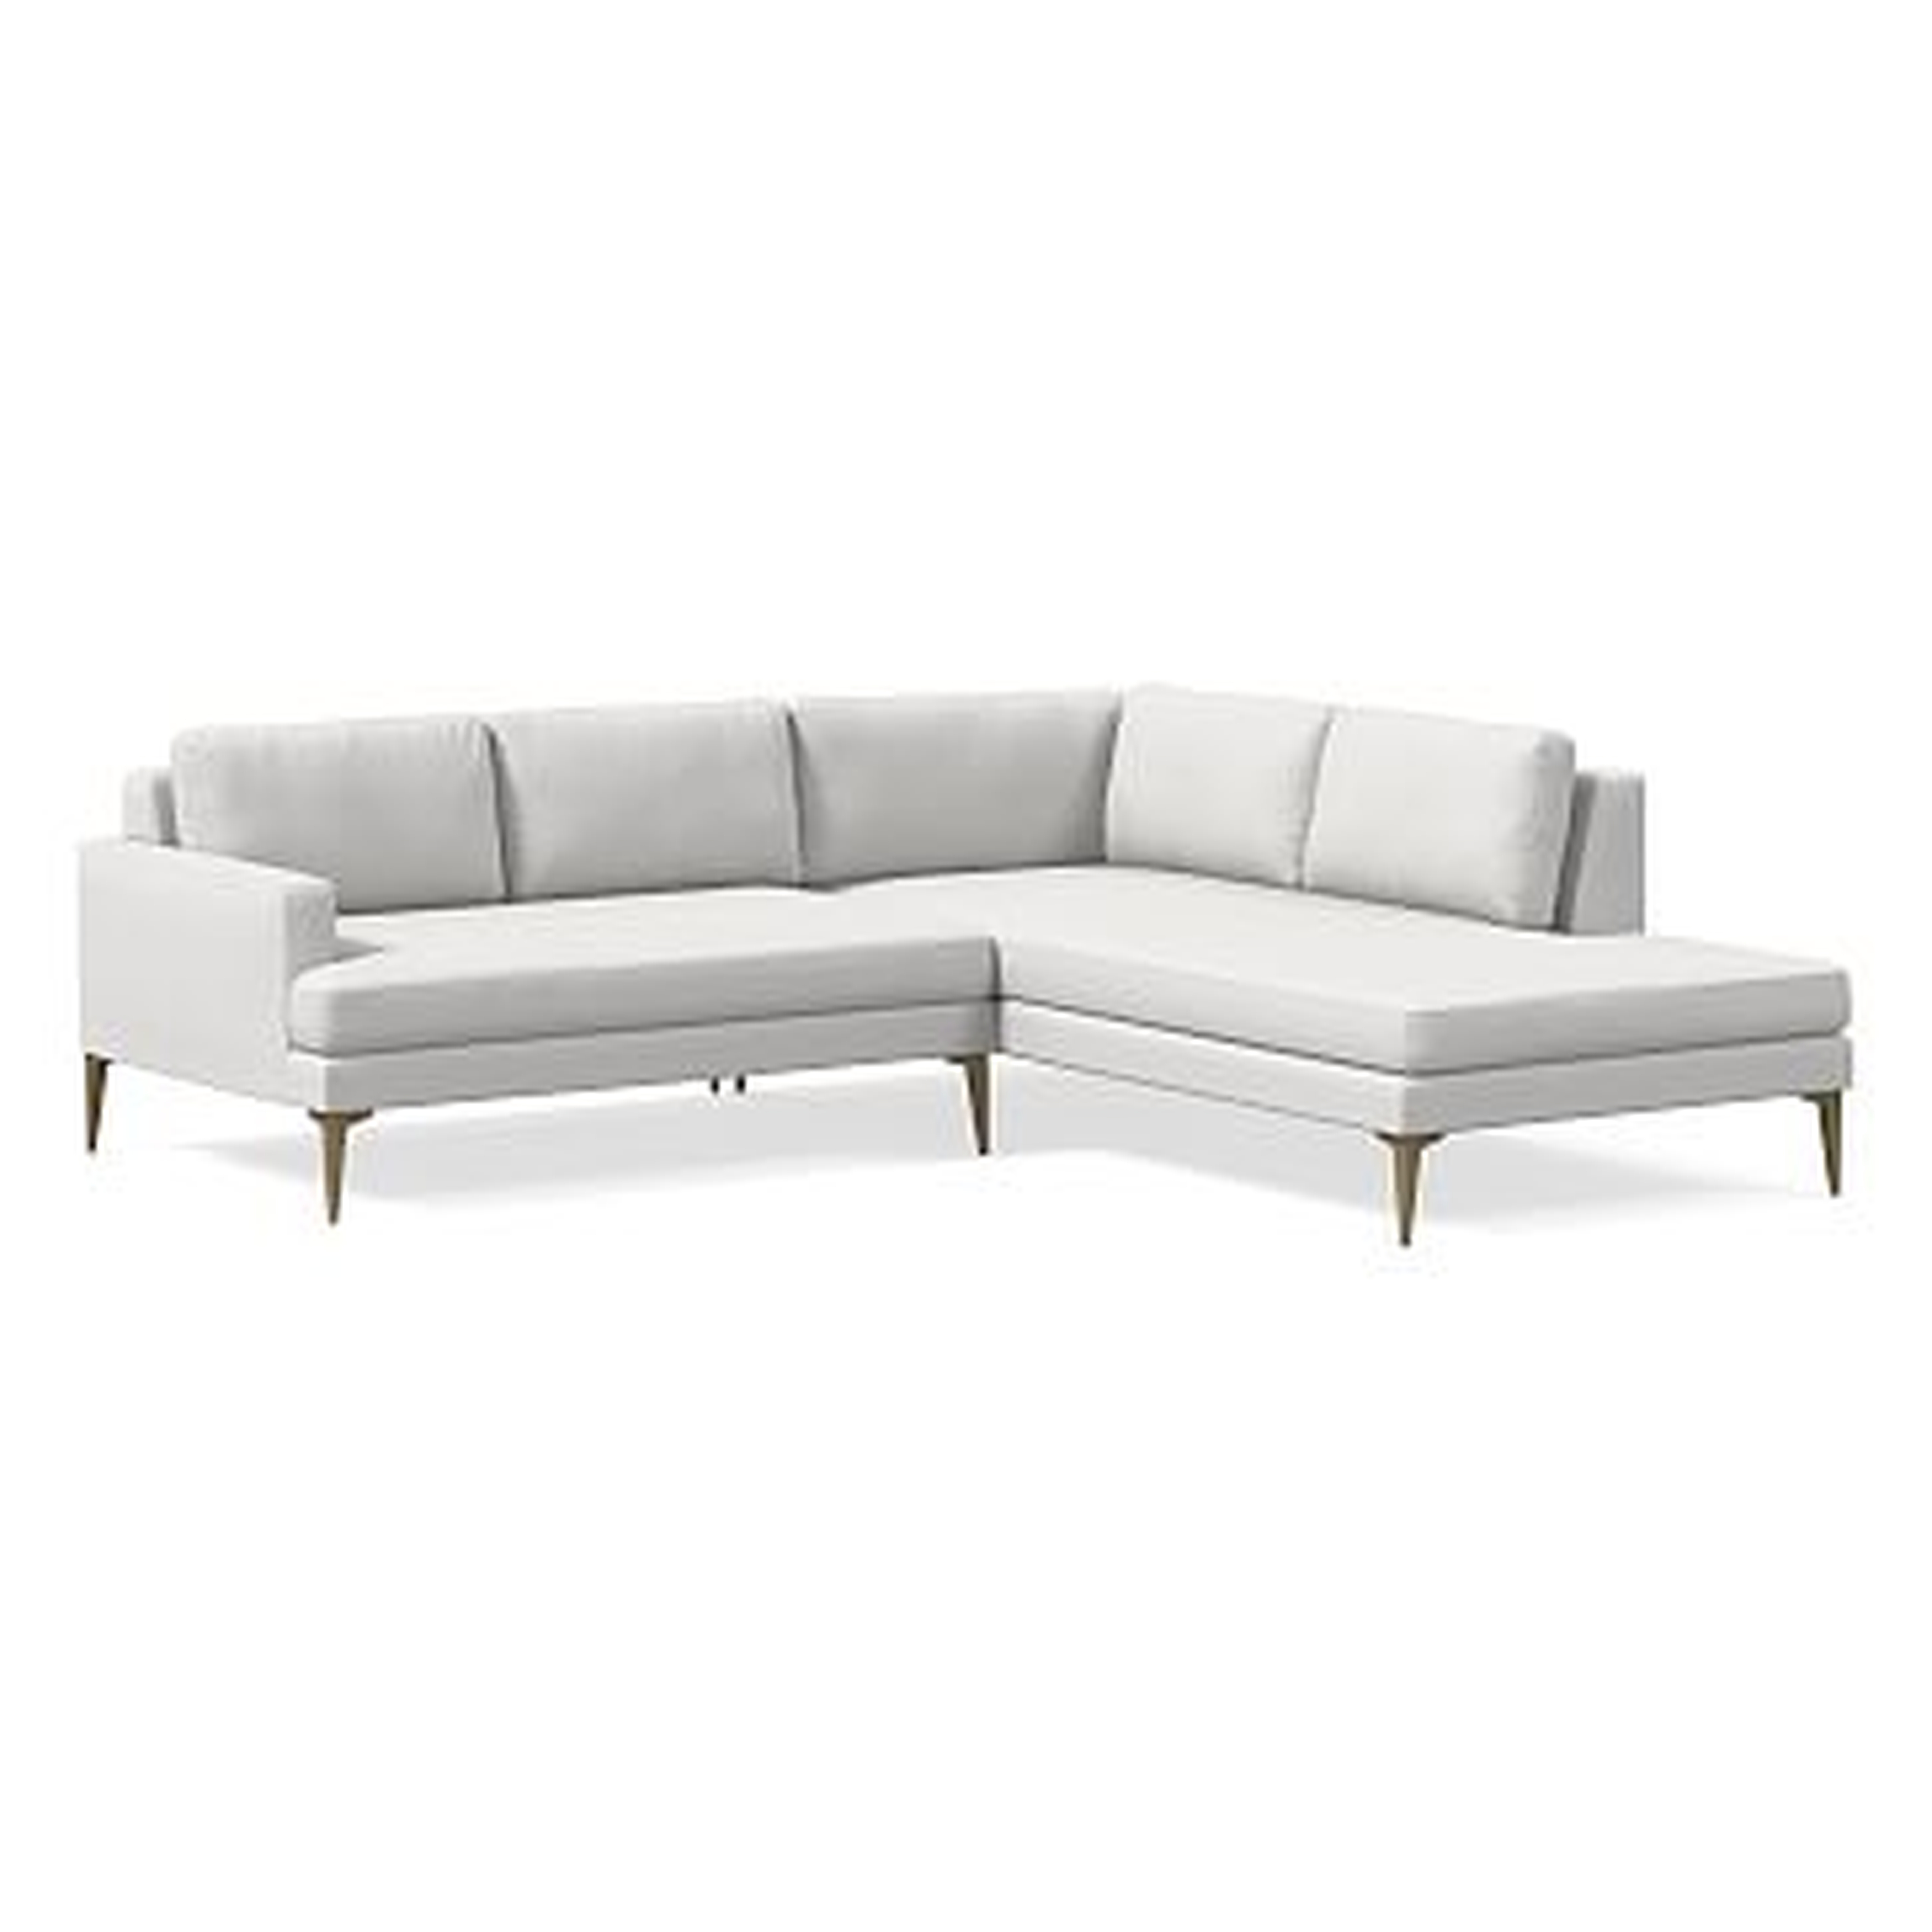 Andes Sectional Set 15: Left Arm 2 Seater Sofa, Right Arm Bumper Chaise, Poly, Performance Washed Canvas, White, Blackened Brass - West Elm